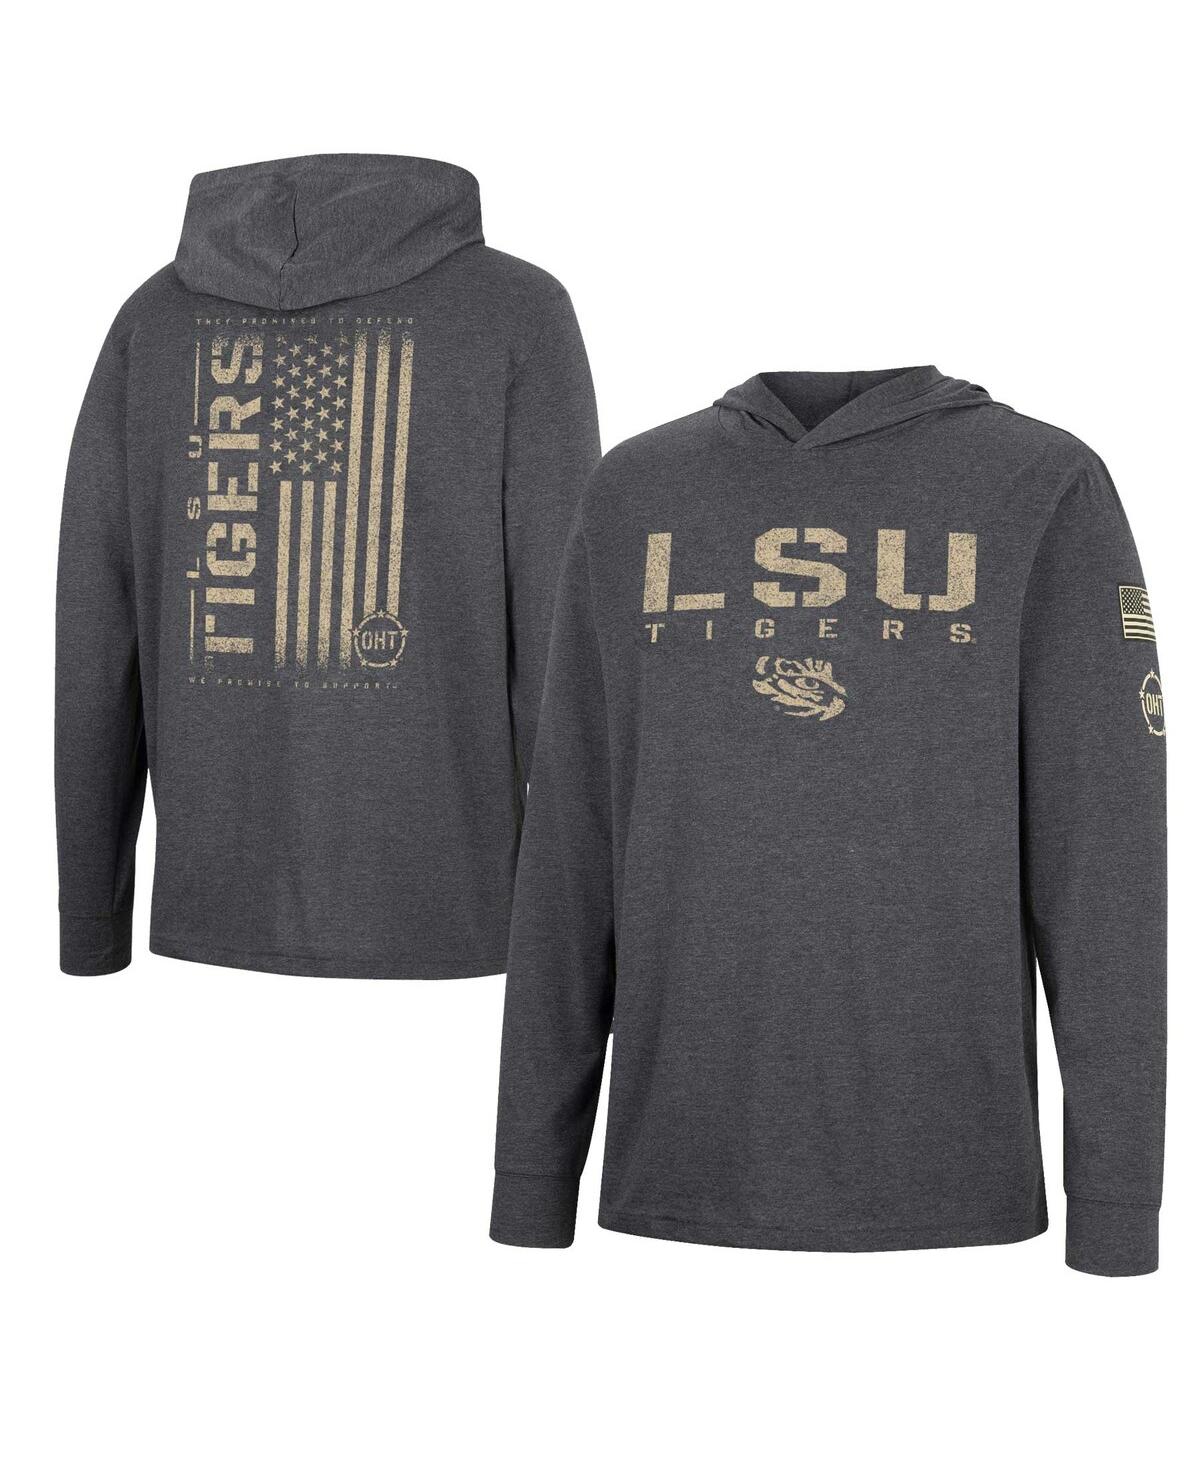 Shop Colosseum Men's  Charcoal Lsu Tigers Team Oht Military-inspired Appreciation Hoodie Long Sleeve T-shi